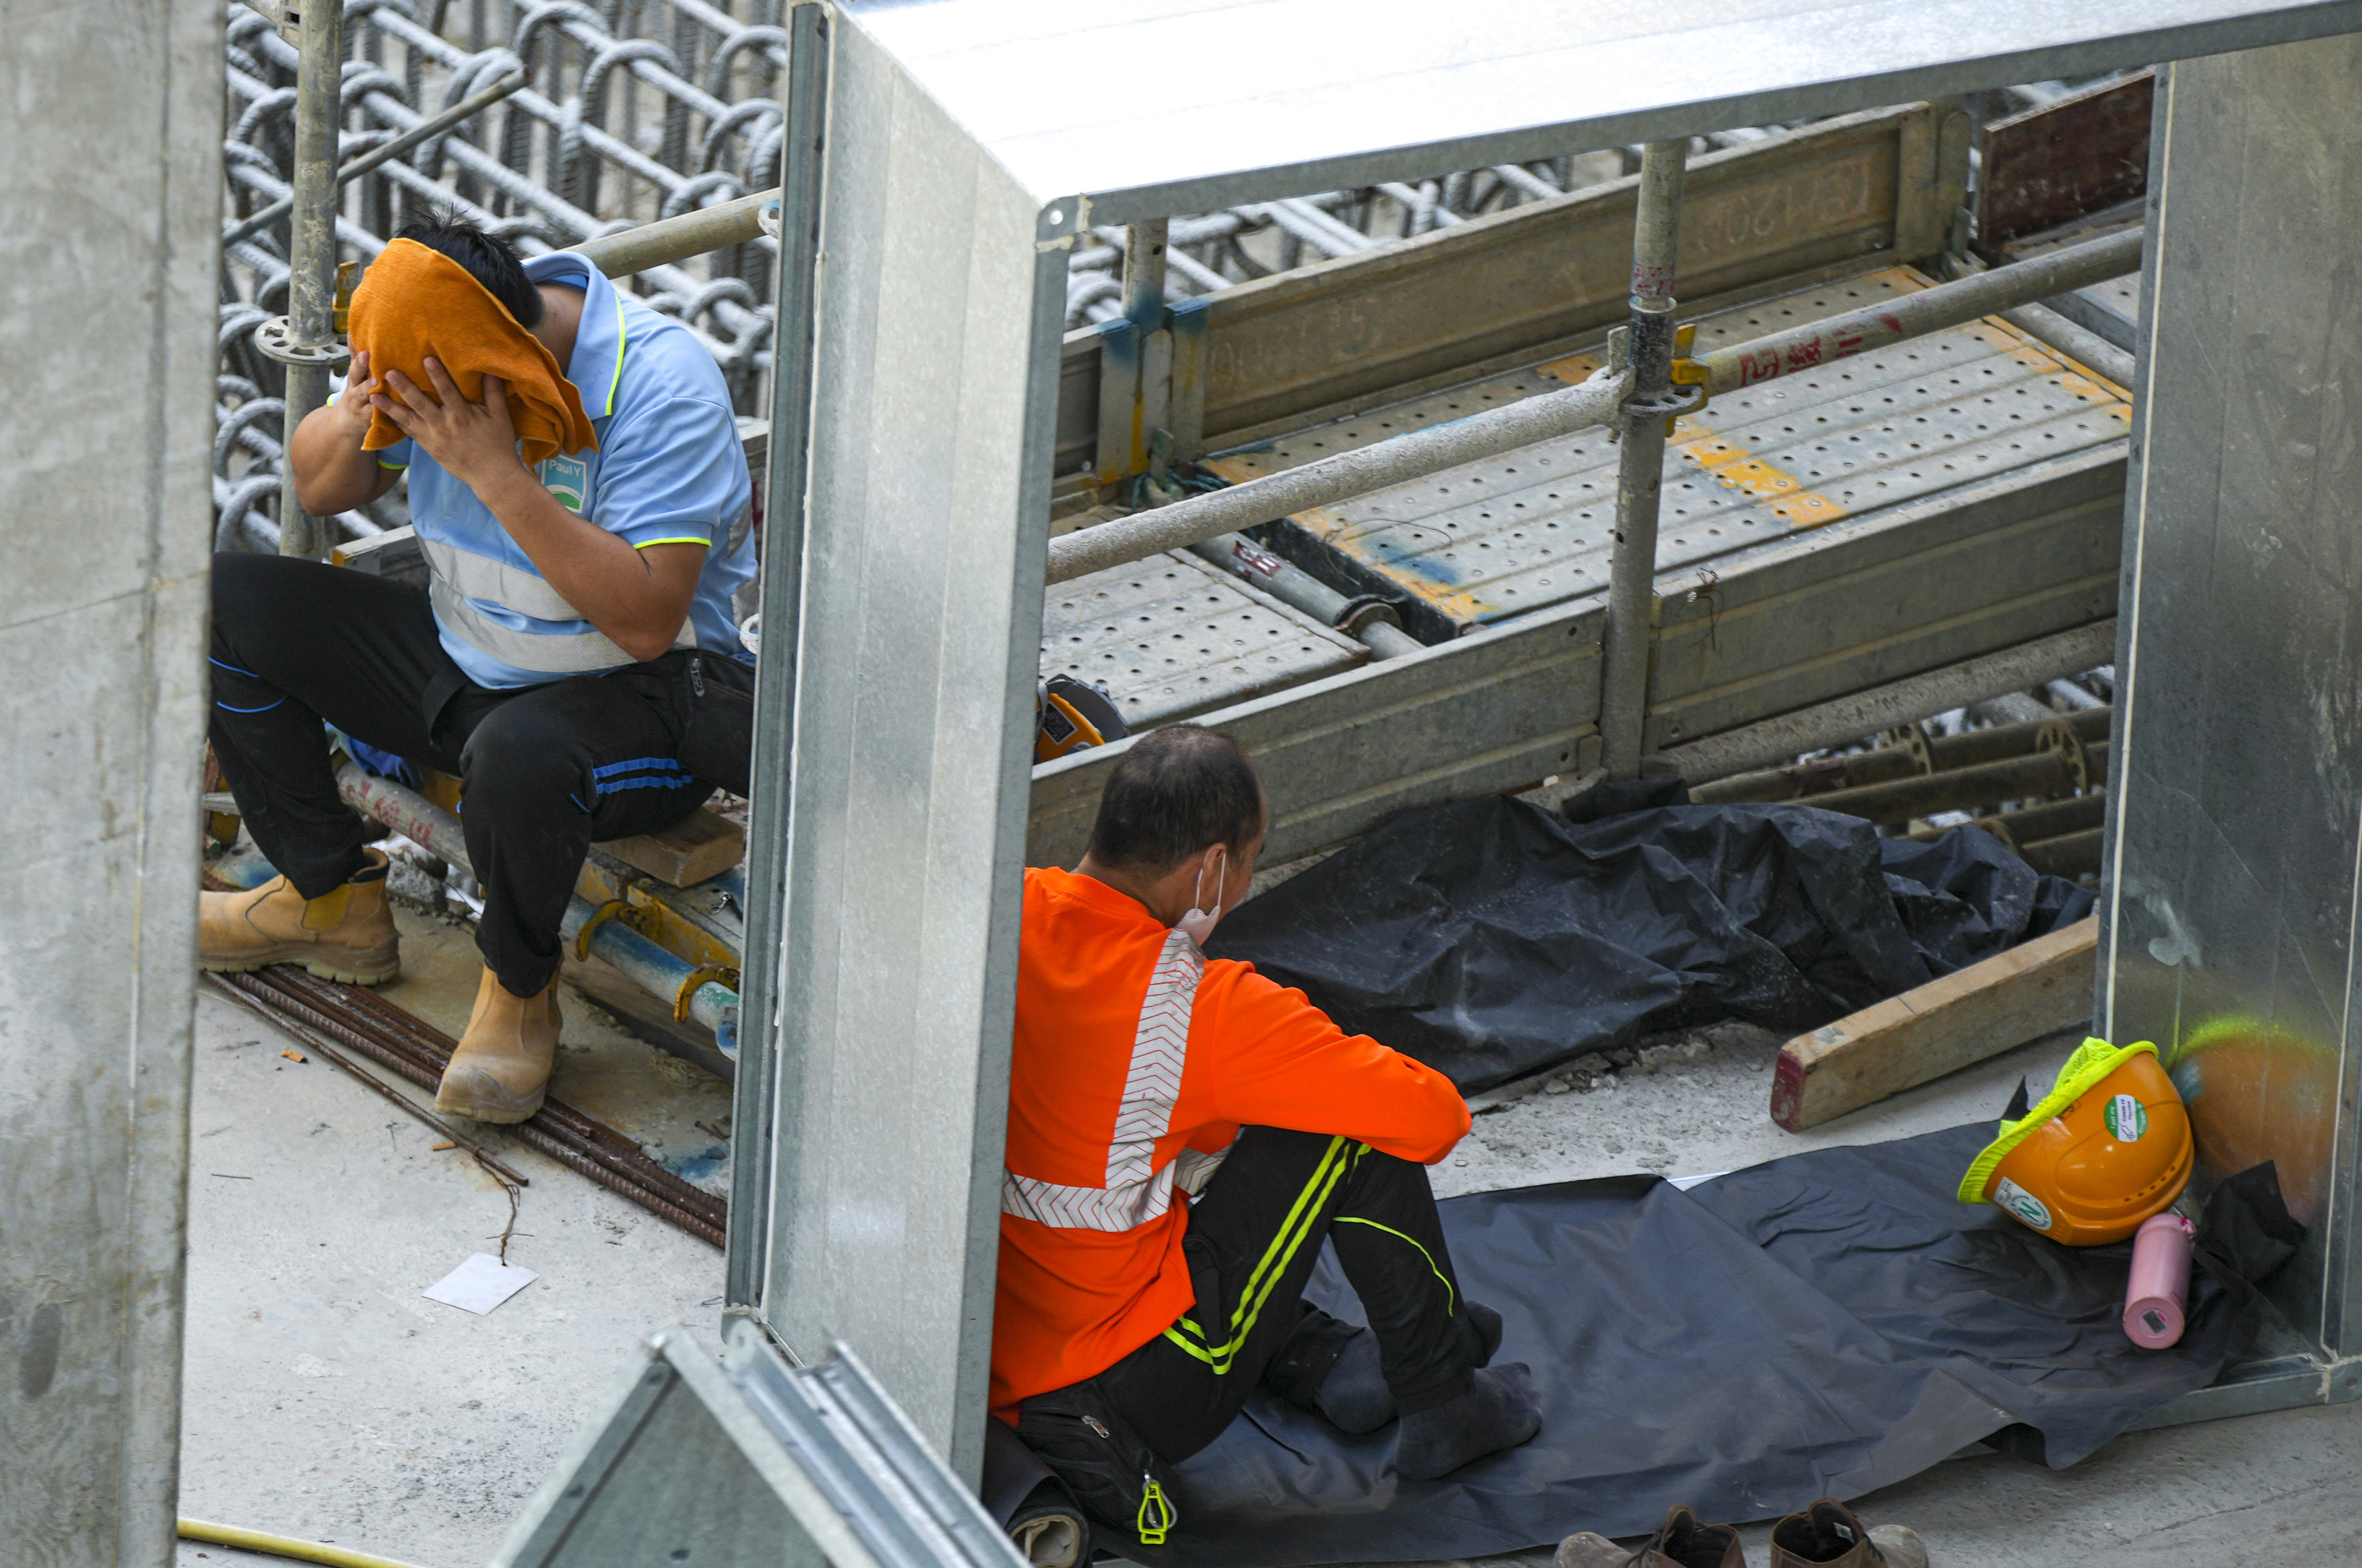 Workers rest at a construction site in West Kowloon. Photo: Sam Tsang